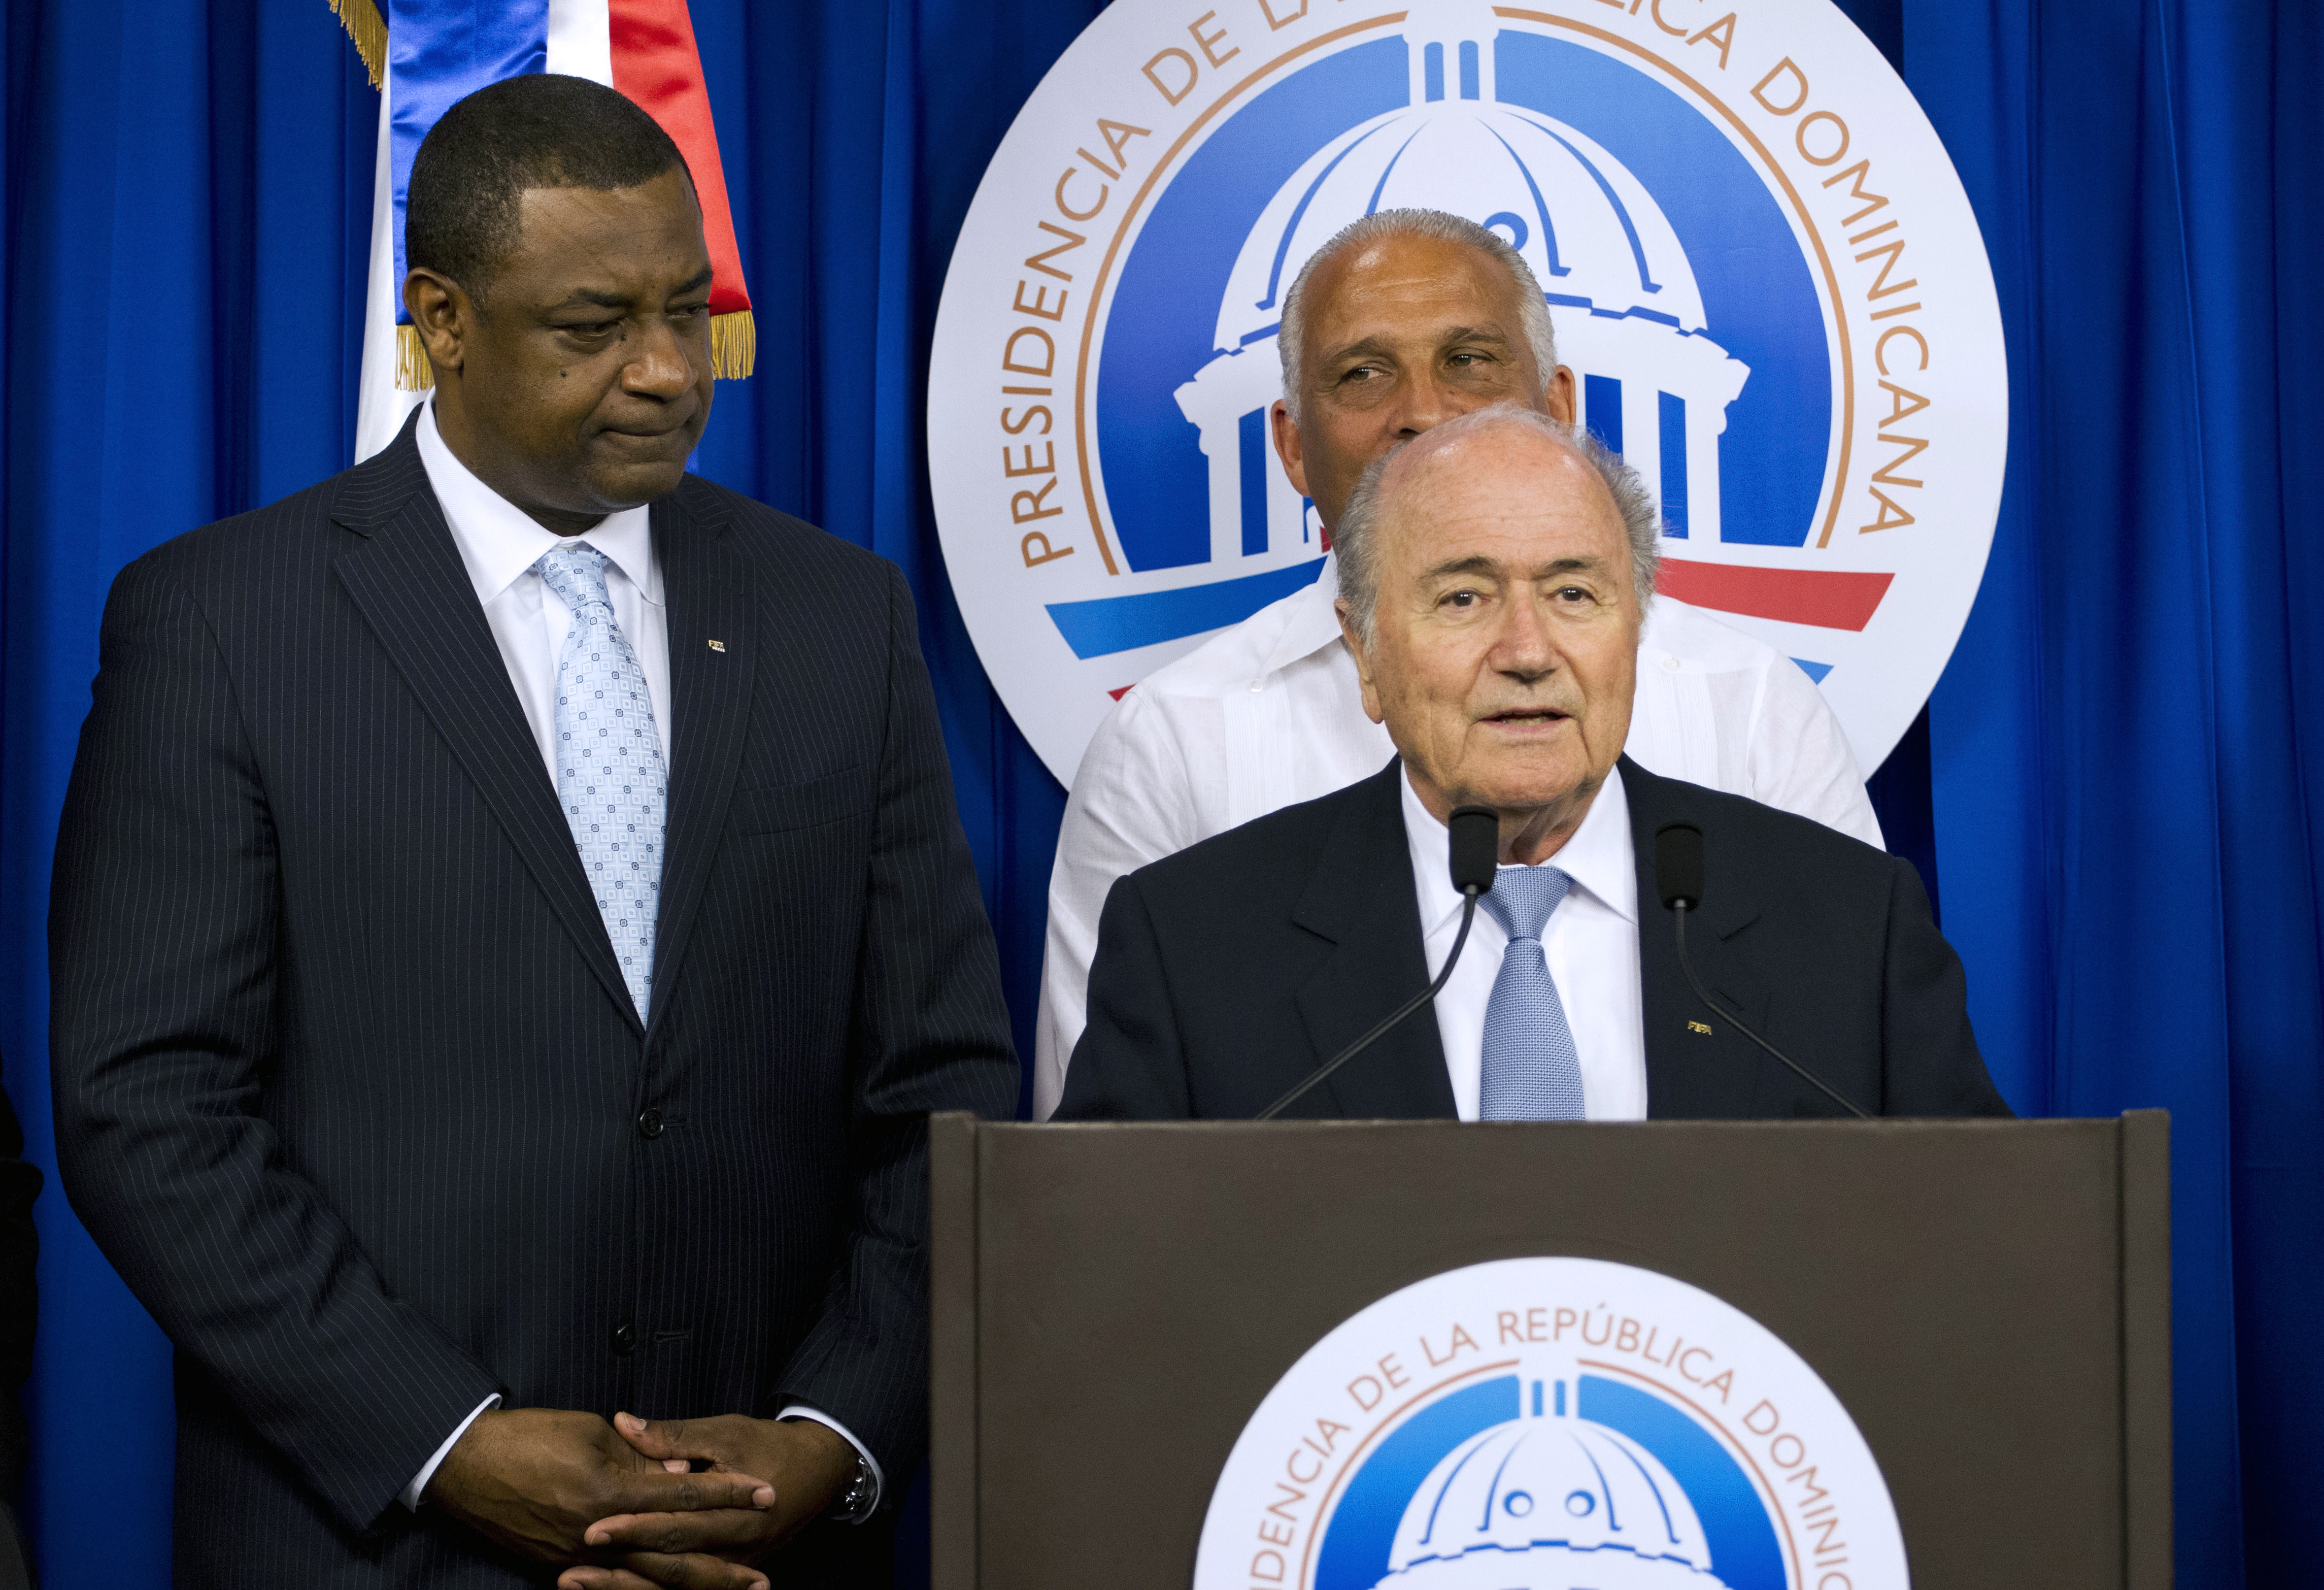 Webb with FIFA President Sepp Blatter at a press conference. Getty